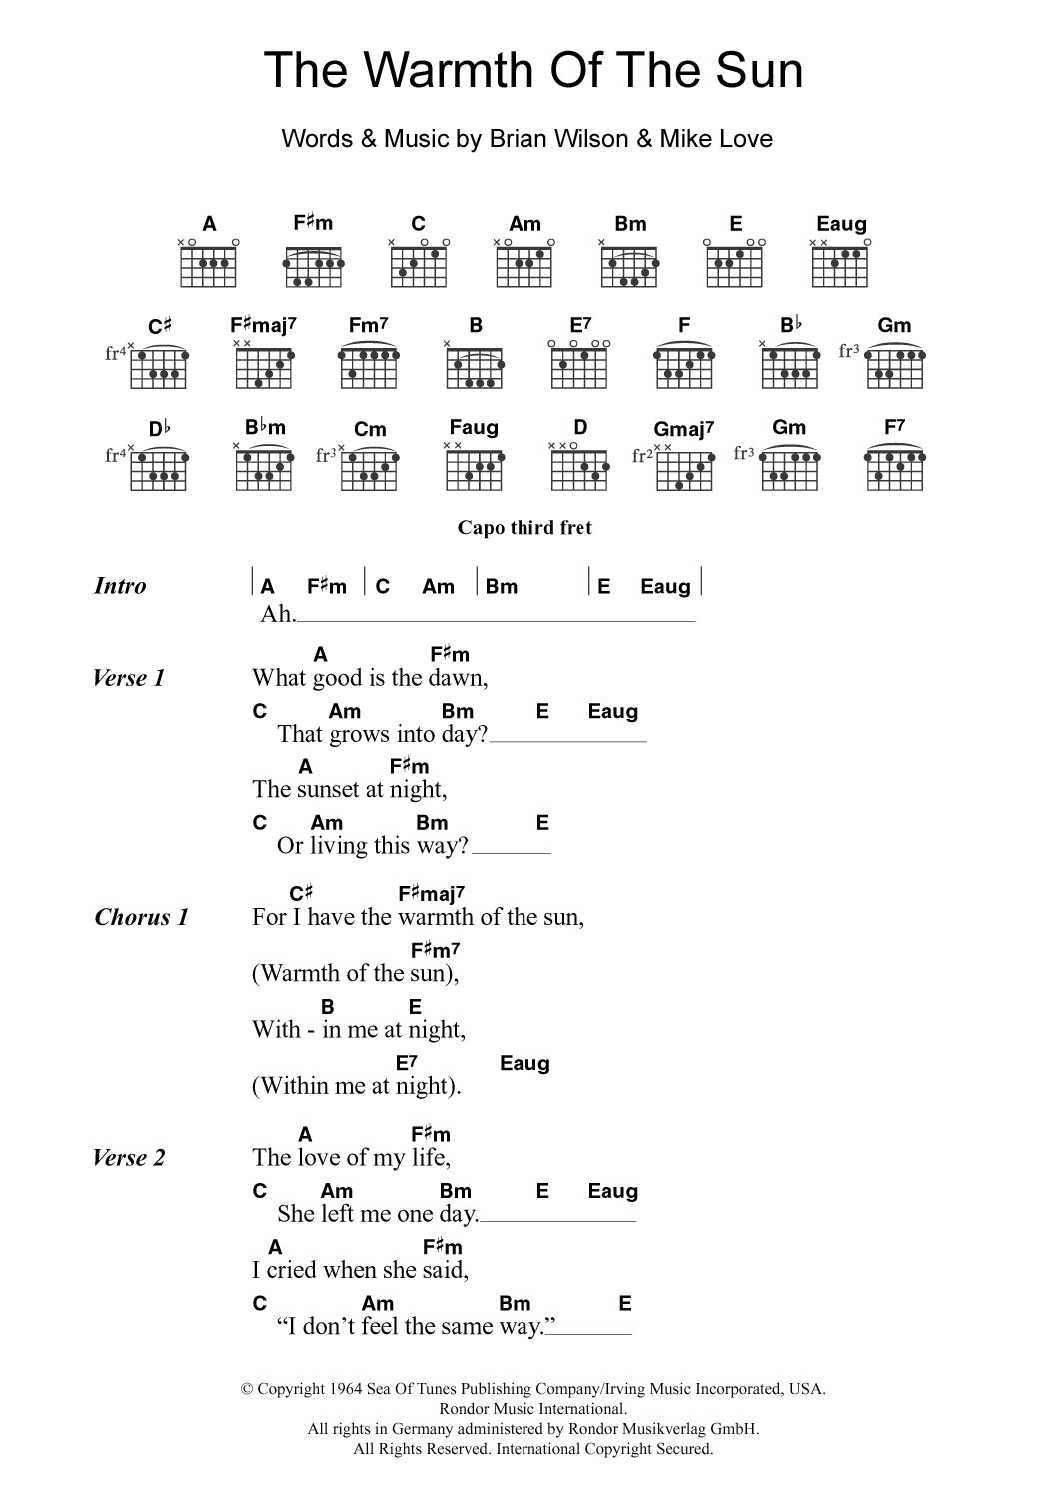 Island In The Sun Chords Pop Music Guitar Chord At Stantons Sheet Music